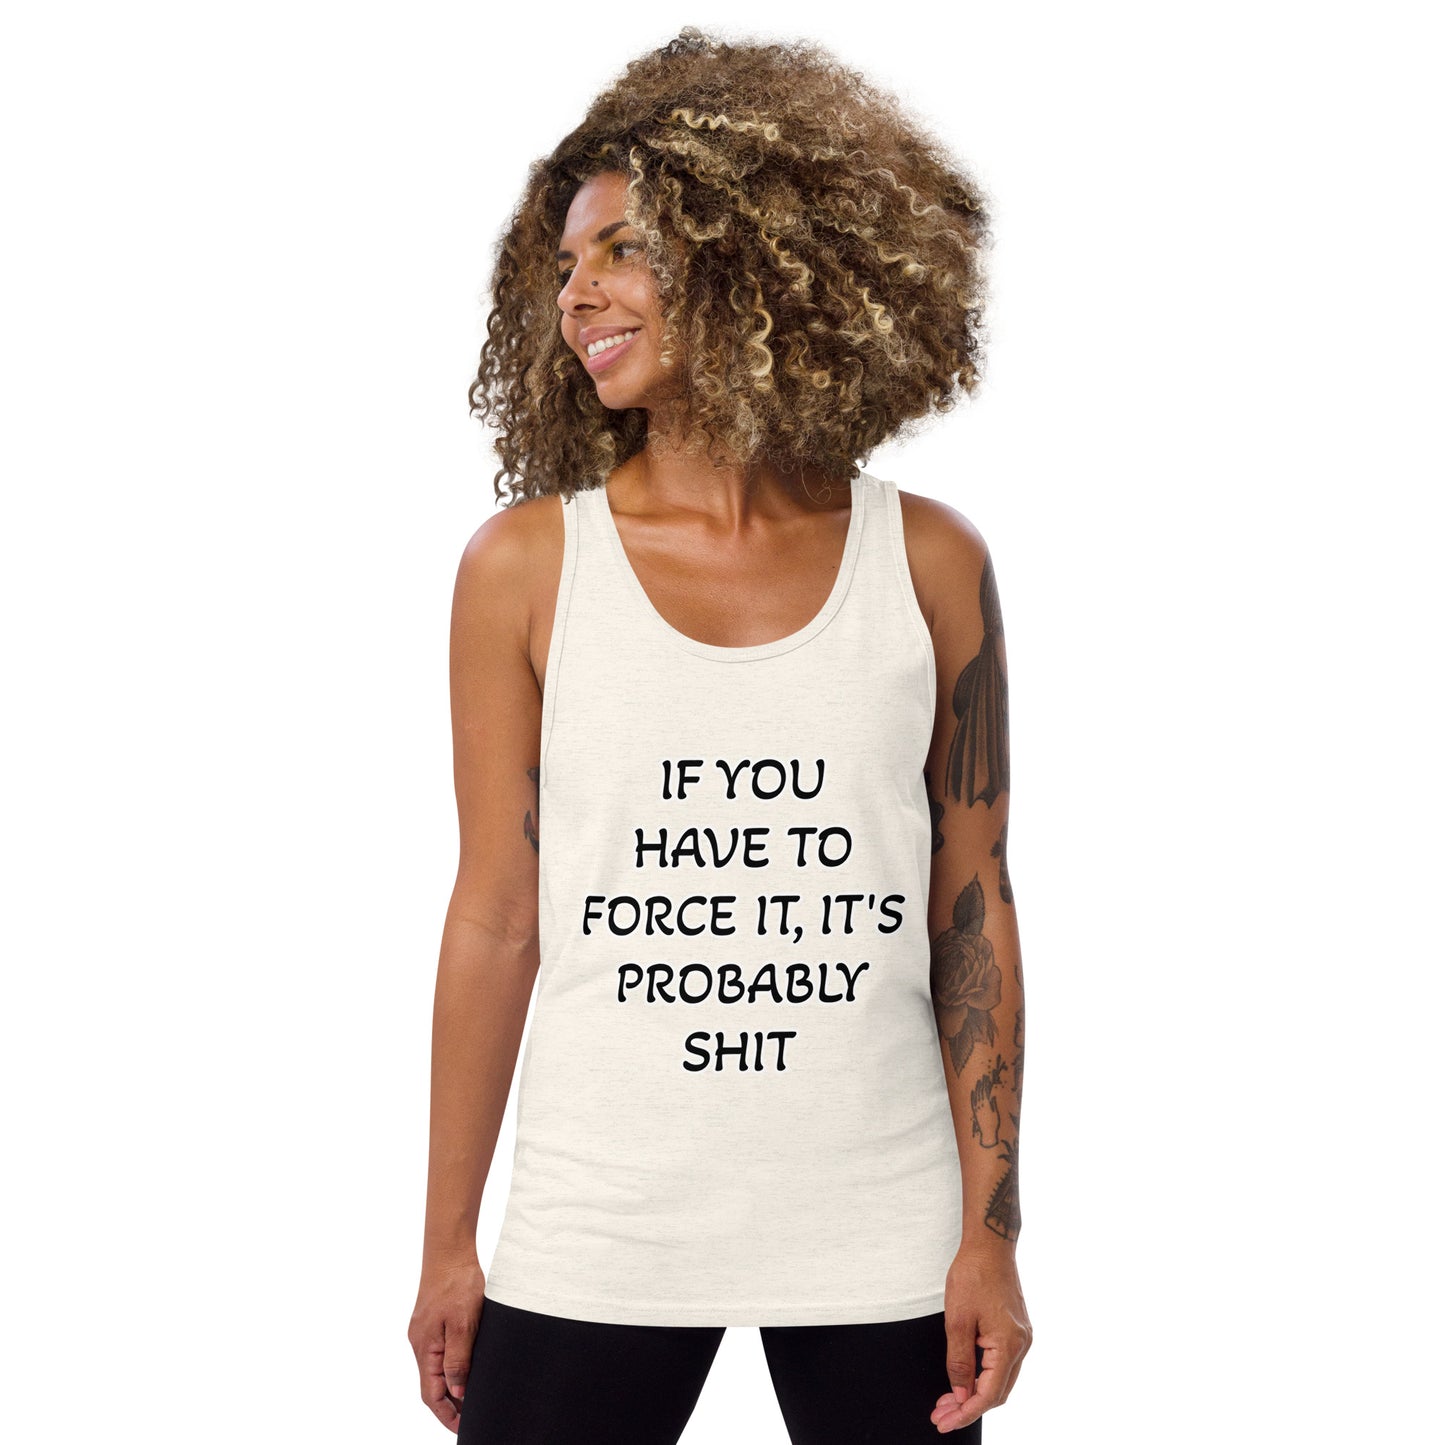 IF YOU HAVE TO FORCE IT, IT'S PROBABLY SHIT- Unisex Tank Top